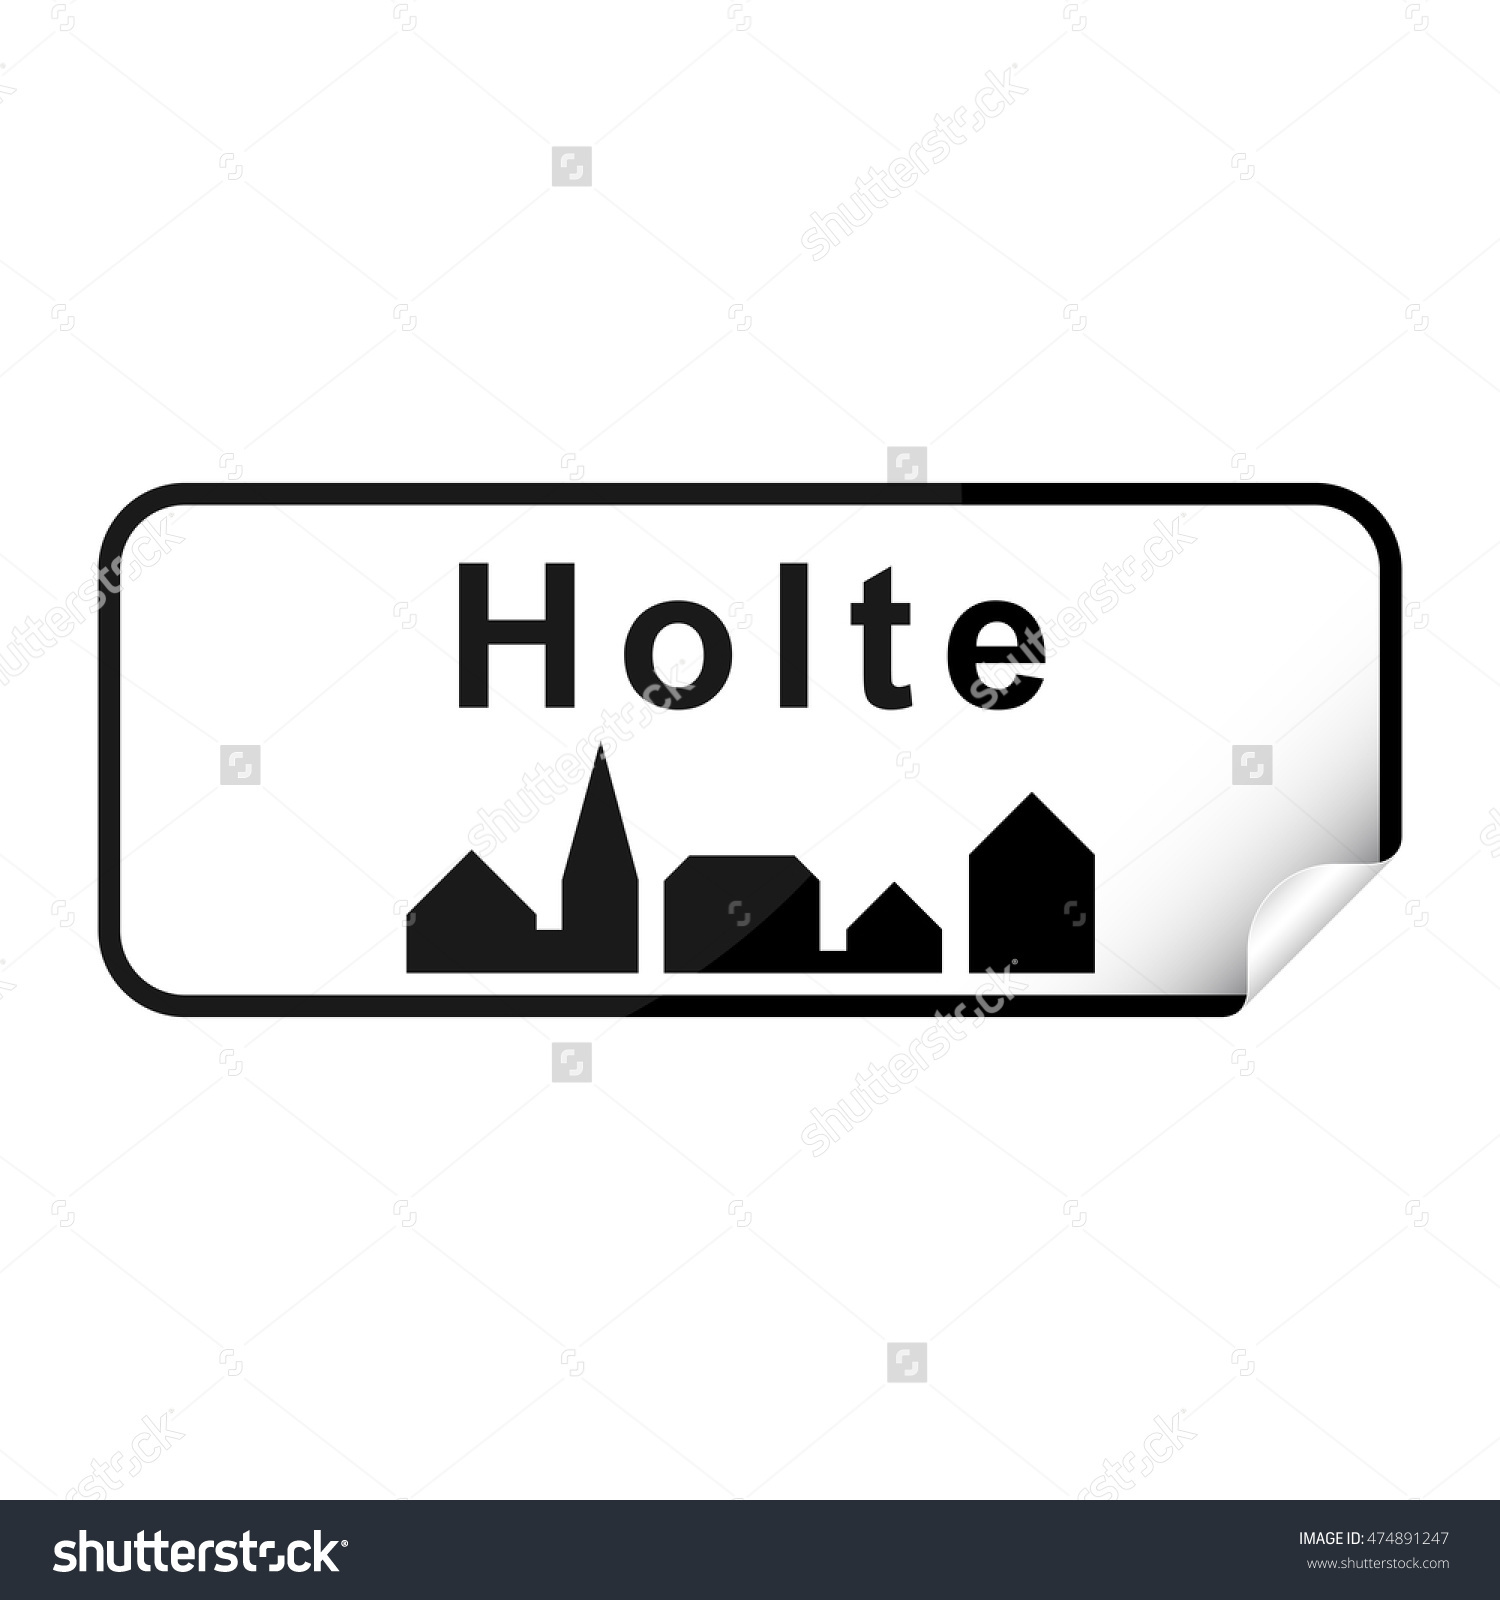 Danish City Sign Sticker Holte With Curly Corner. Stock Vector.